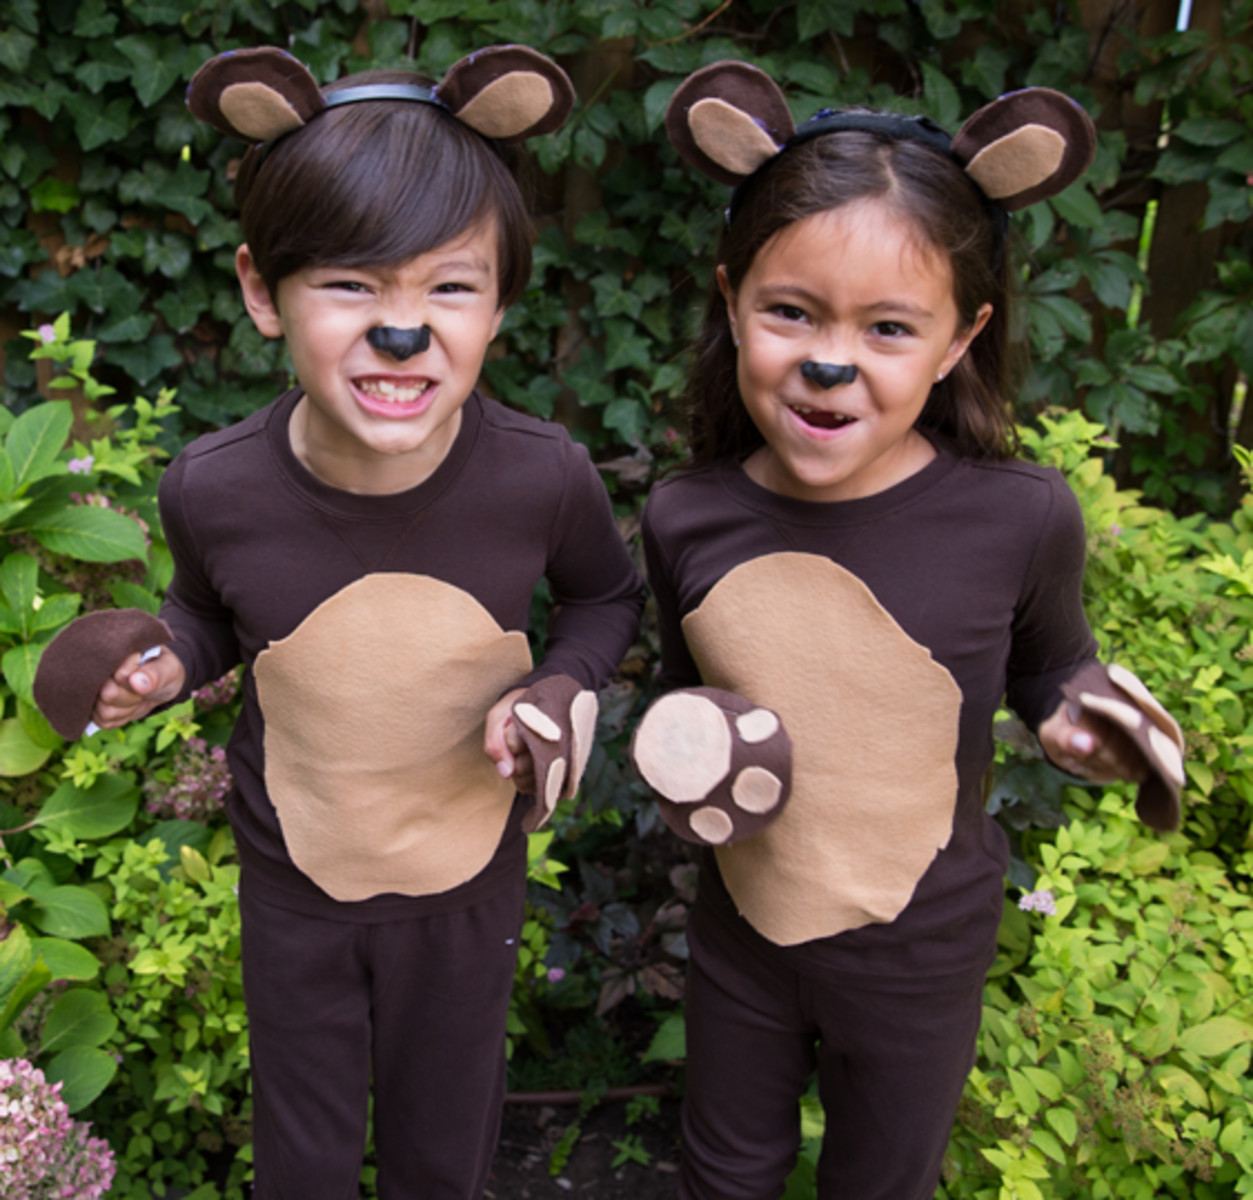 DIY Bear Costume
 Recreate this easy DIY kids bear costume by starting with